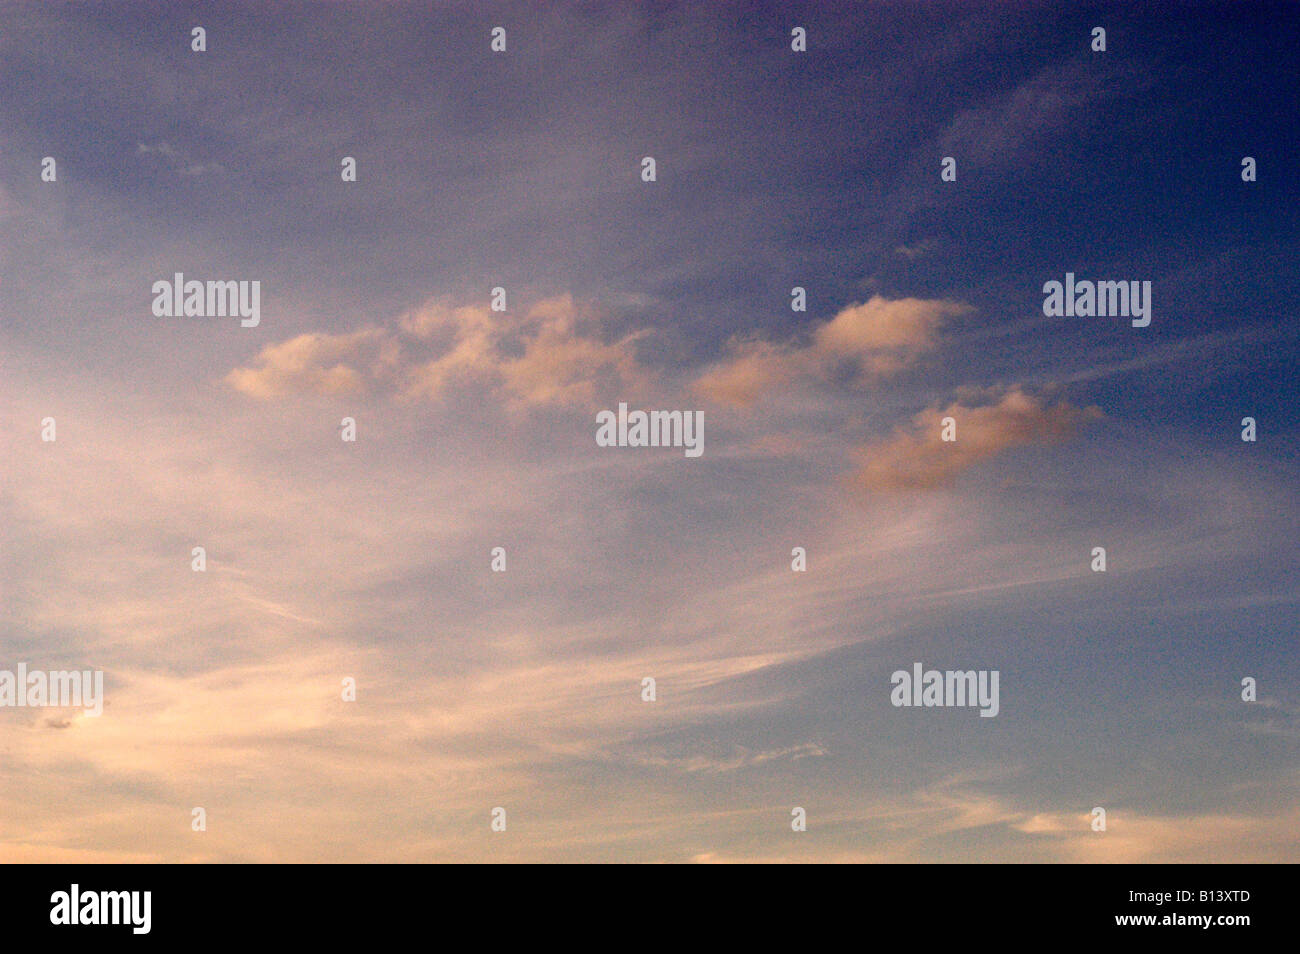 CIRRUS CLOUDS IN EVENING SKY Stock Photo